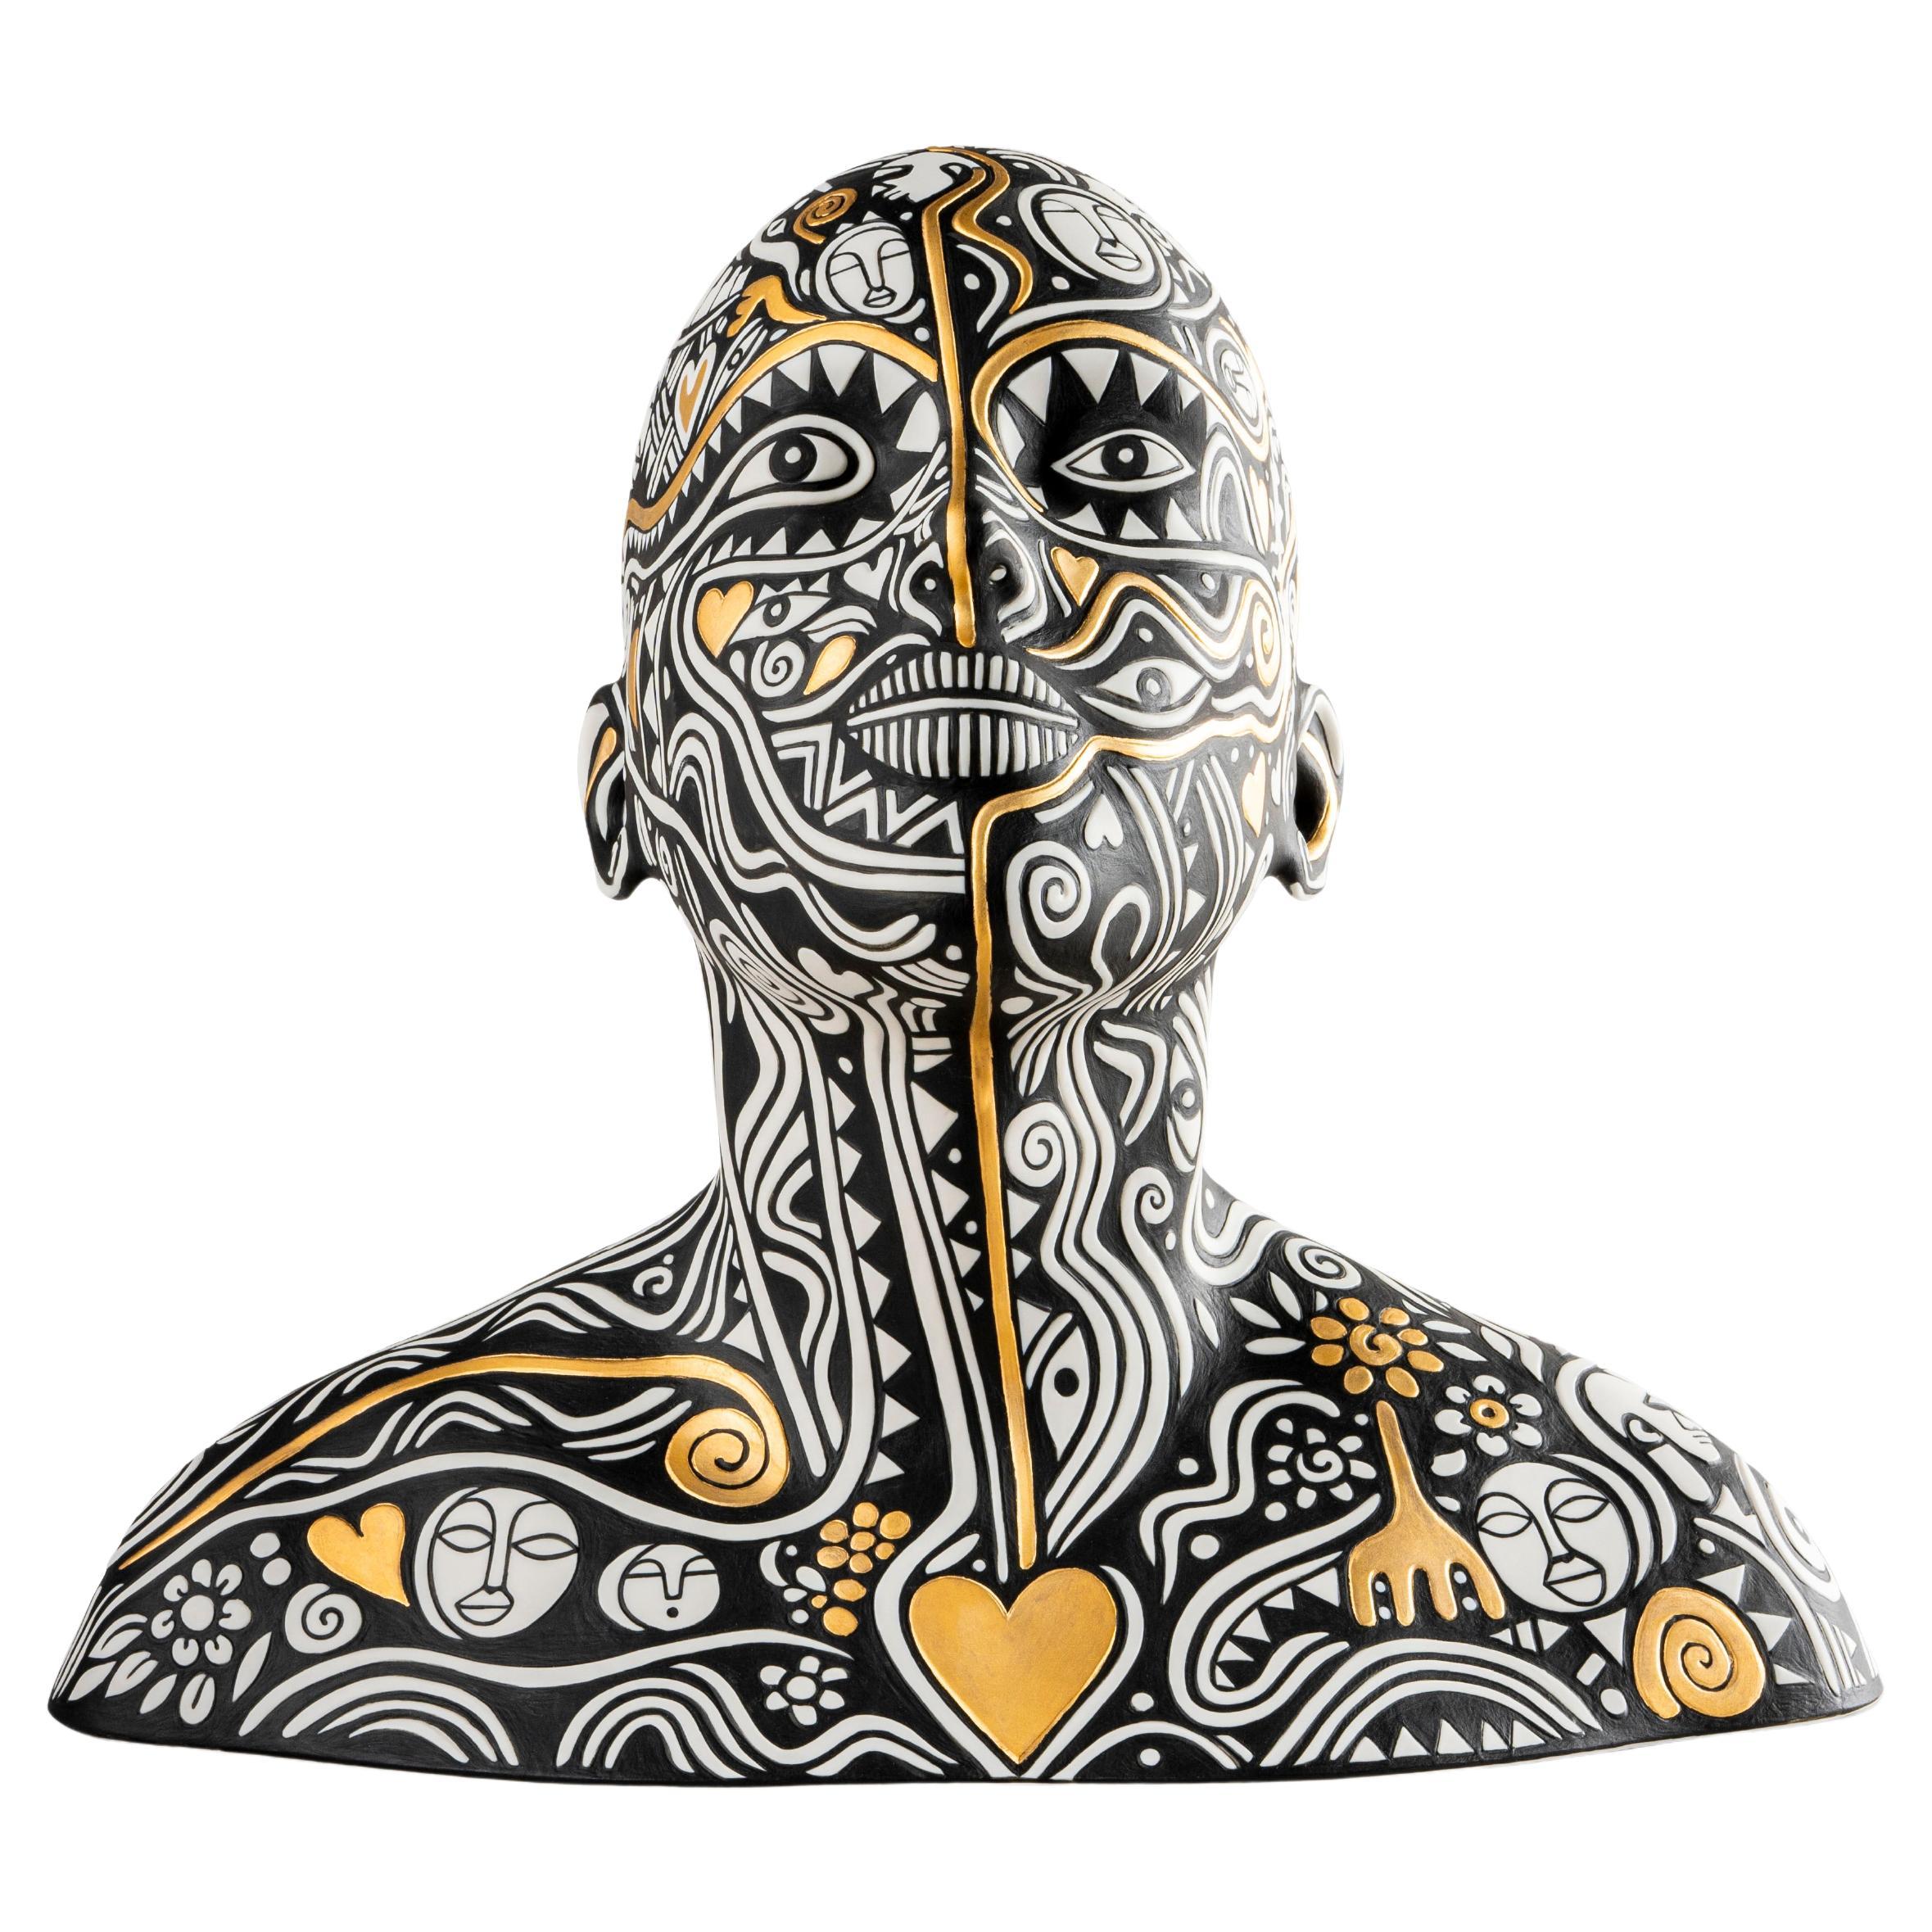 The Dreamer by Laolu - bust Sculpture. Limited Edition For Sale